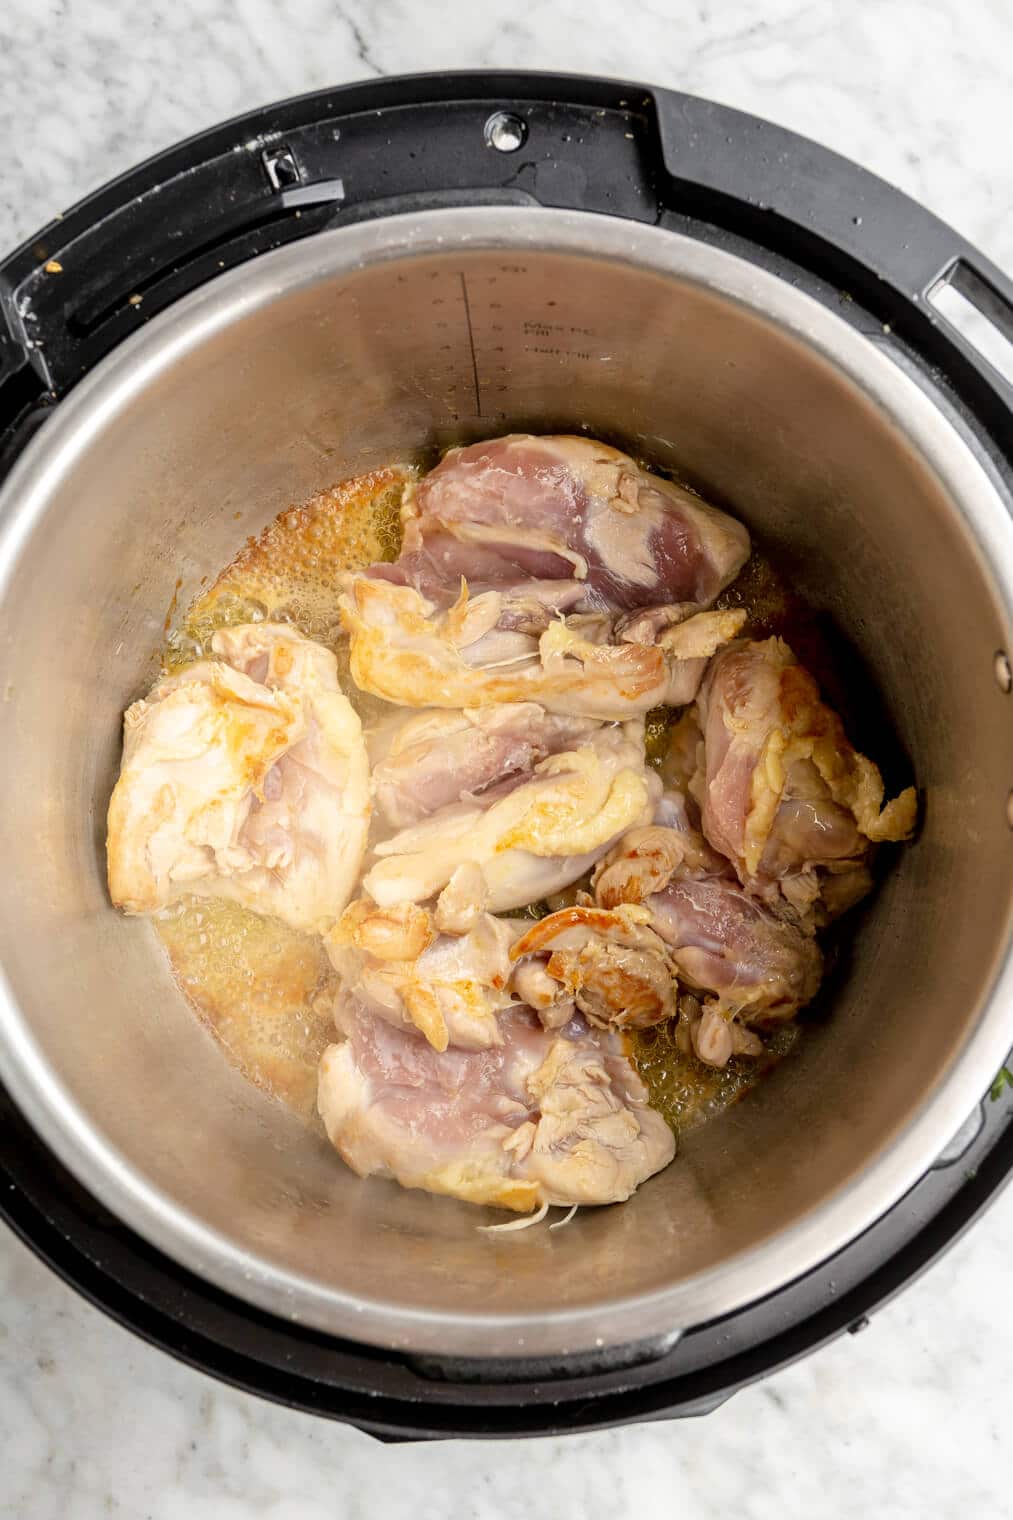 Raw chicken in an instant pot on saute mode.